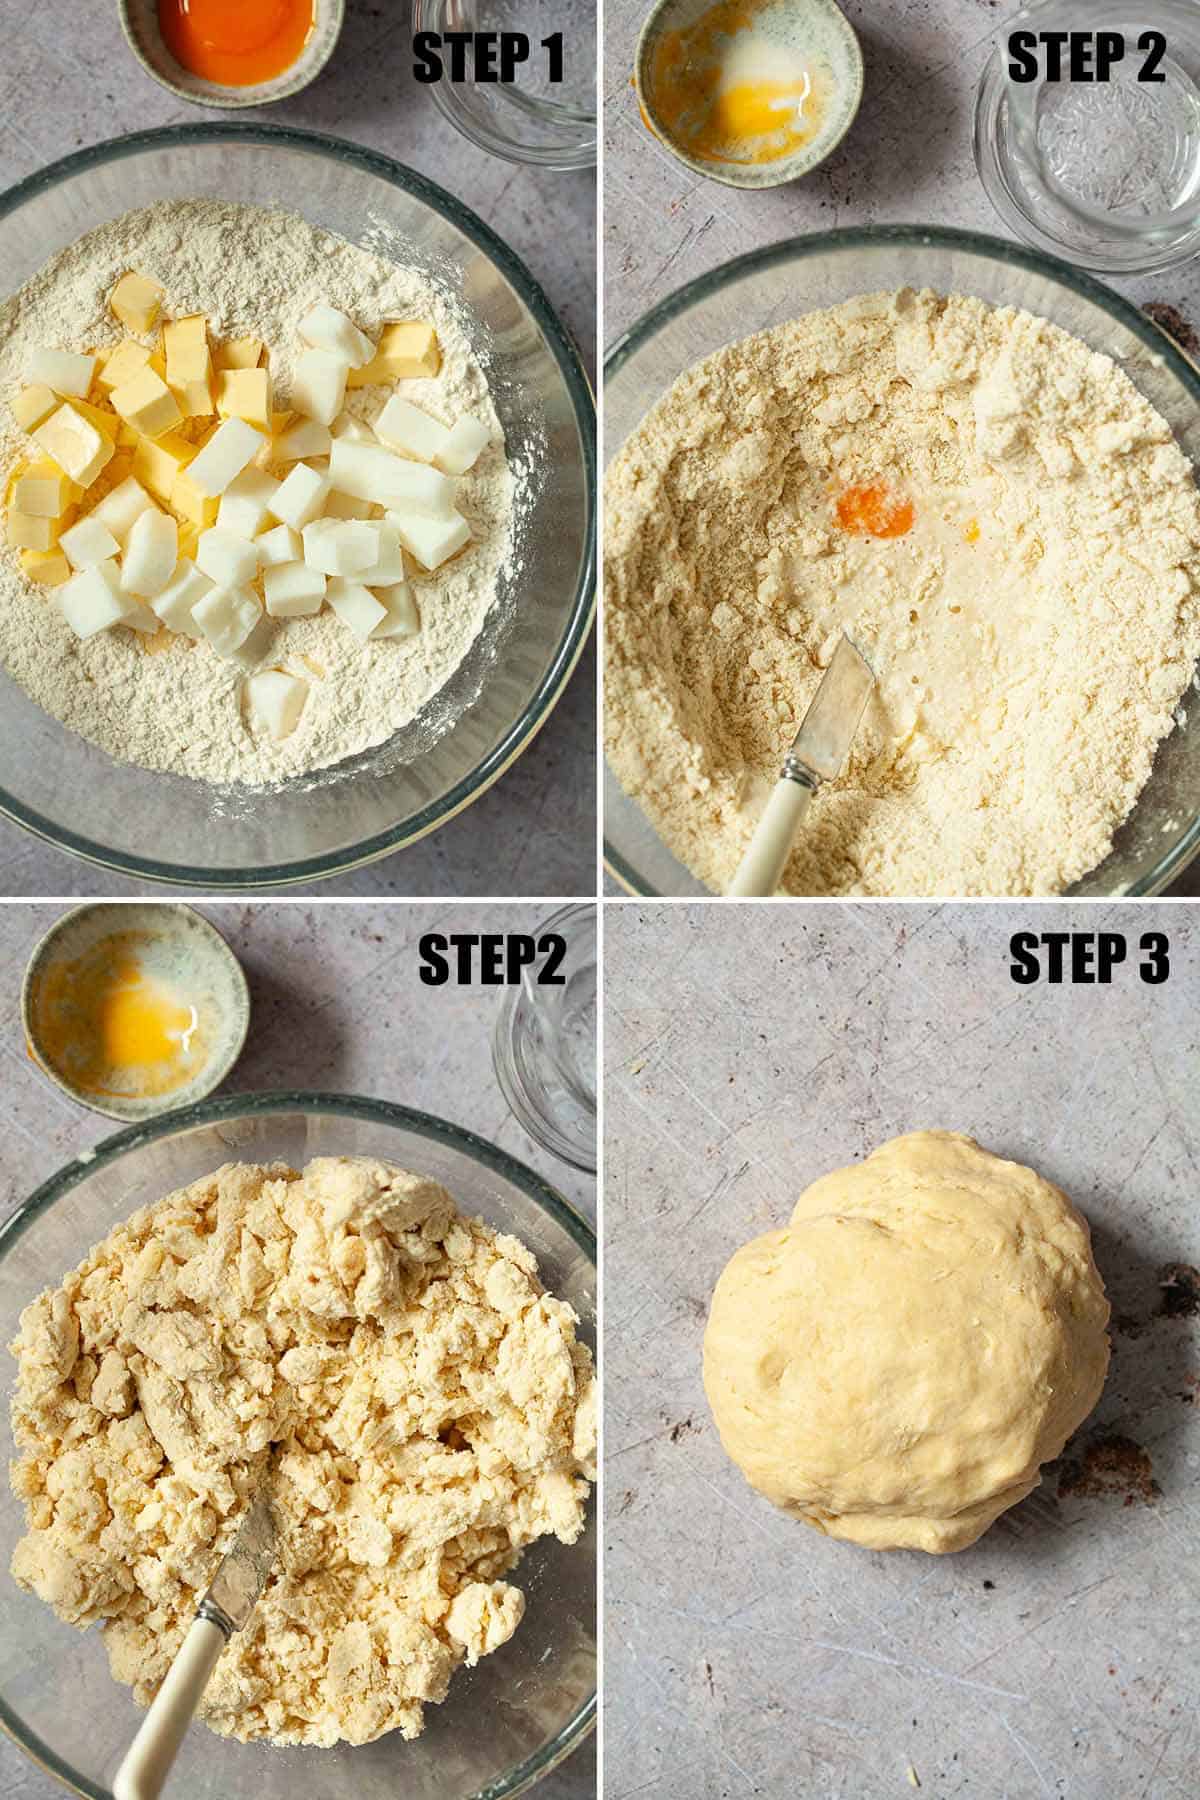 Collage of images showing shortcrust pastry being made from strong bread flour.